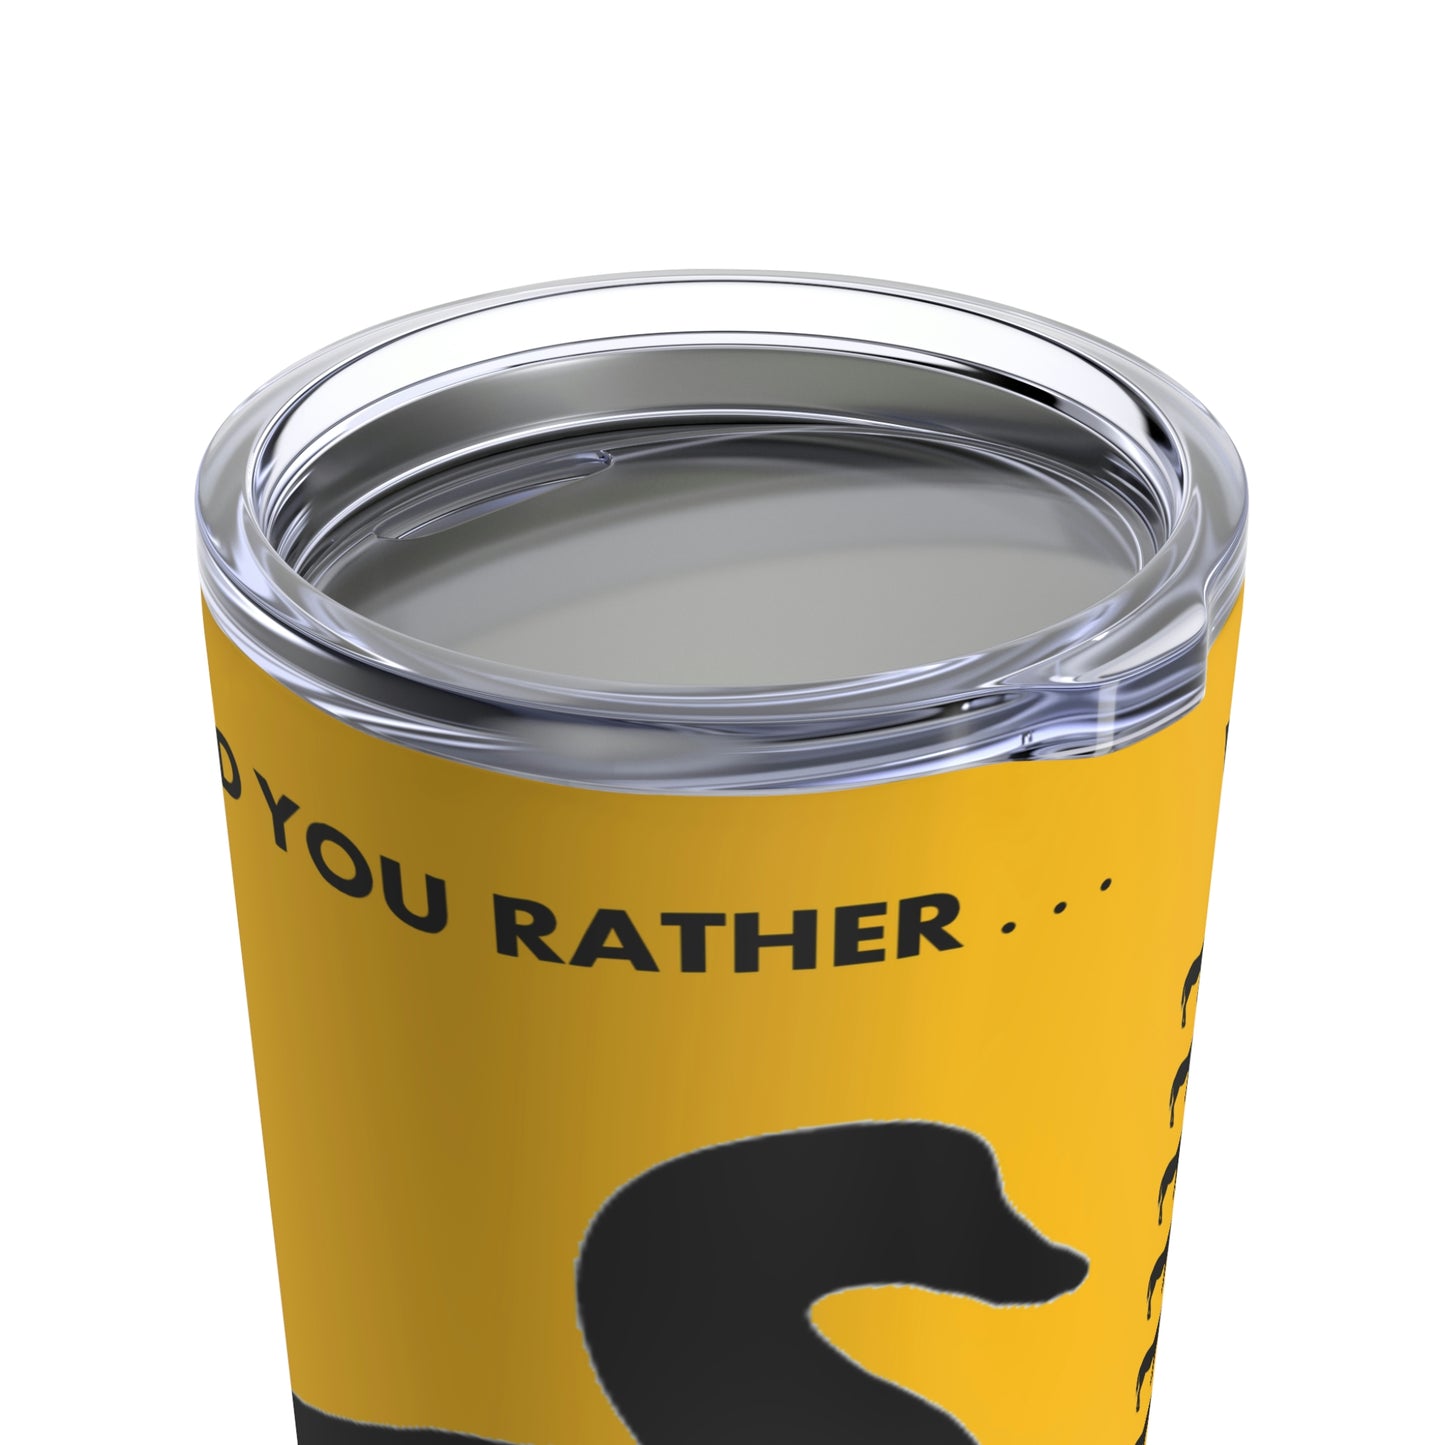 Would You Rather - Duck/Horse - Tumbler 20oz